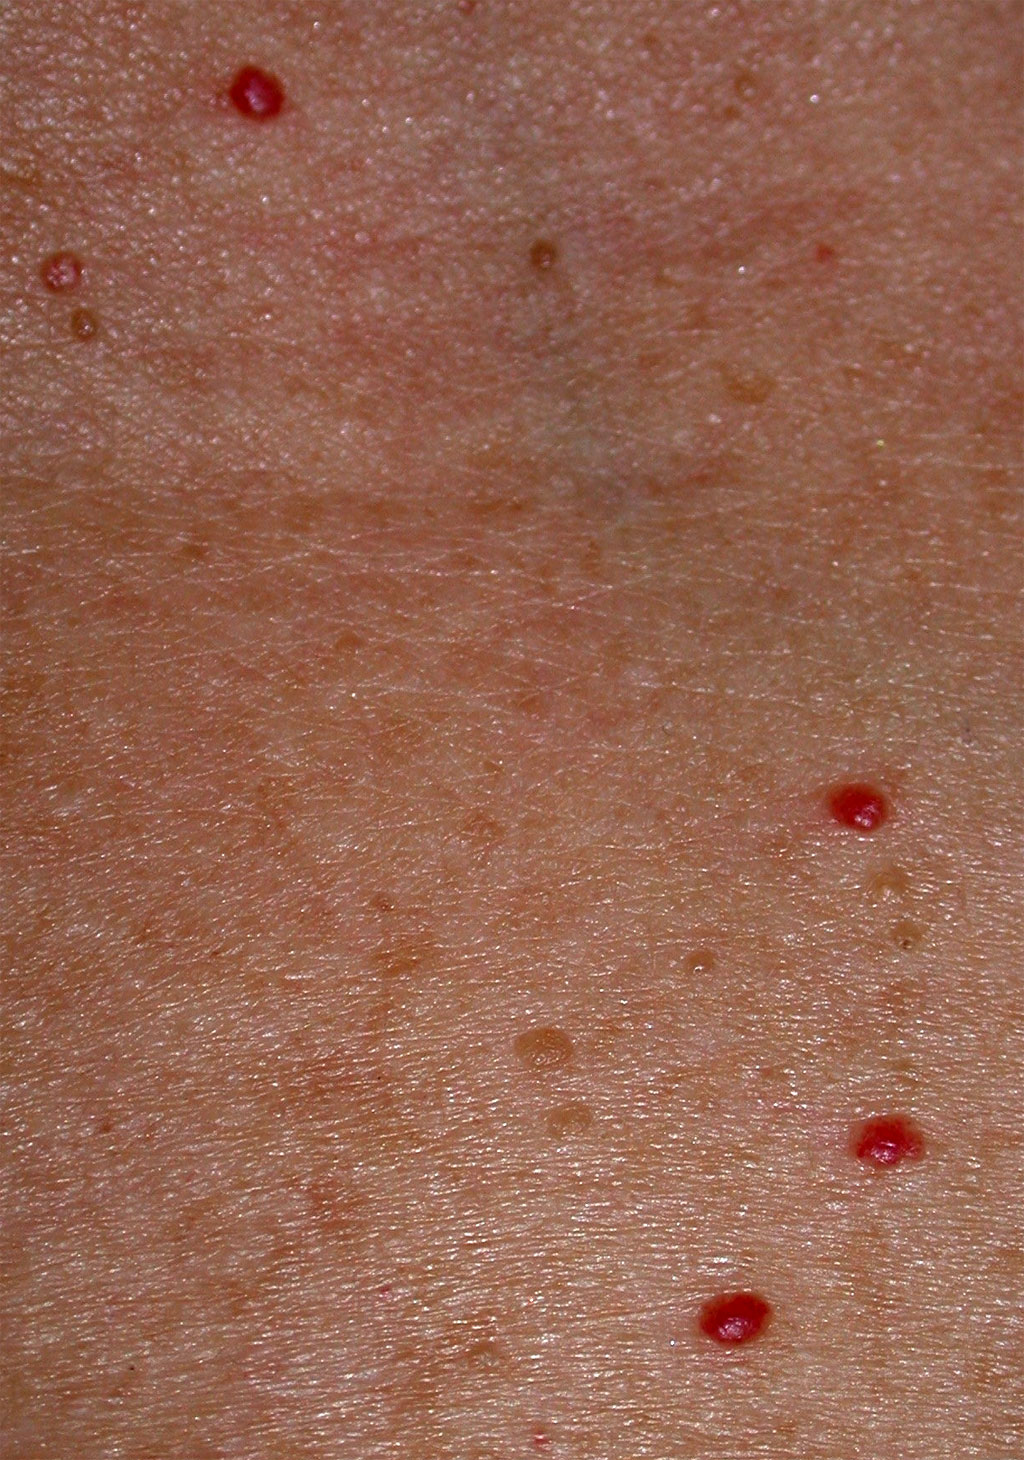 7-causes-of-red-spots-and-bumps-on-skin-with-pictures-allure